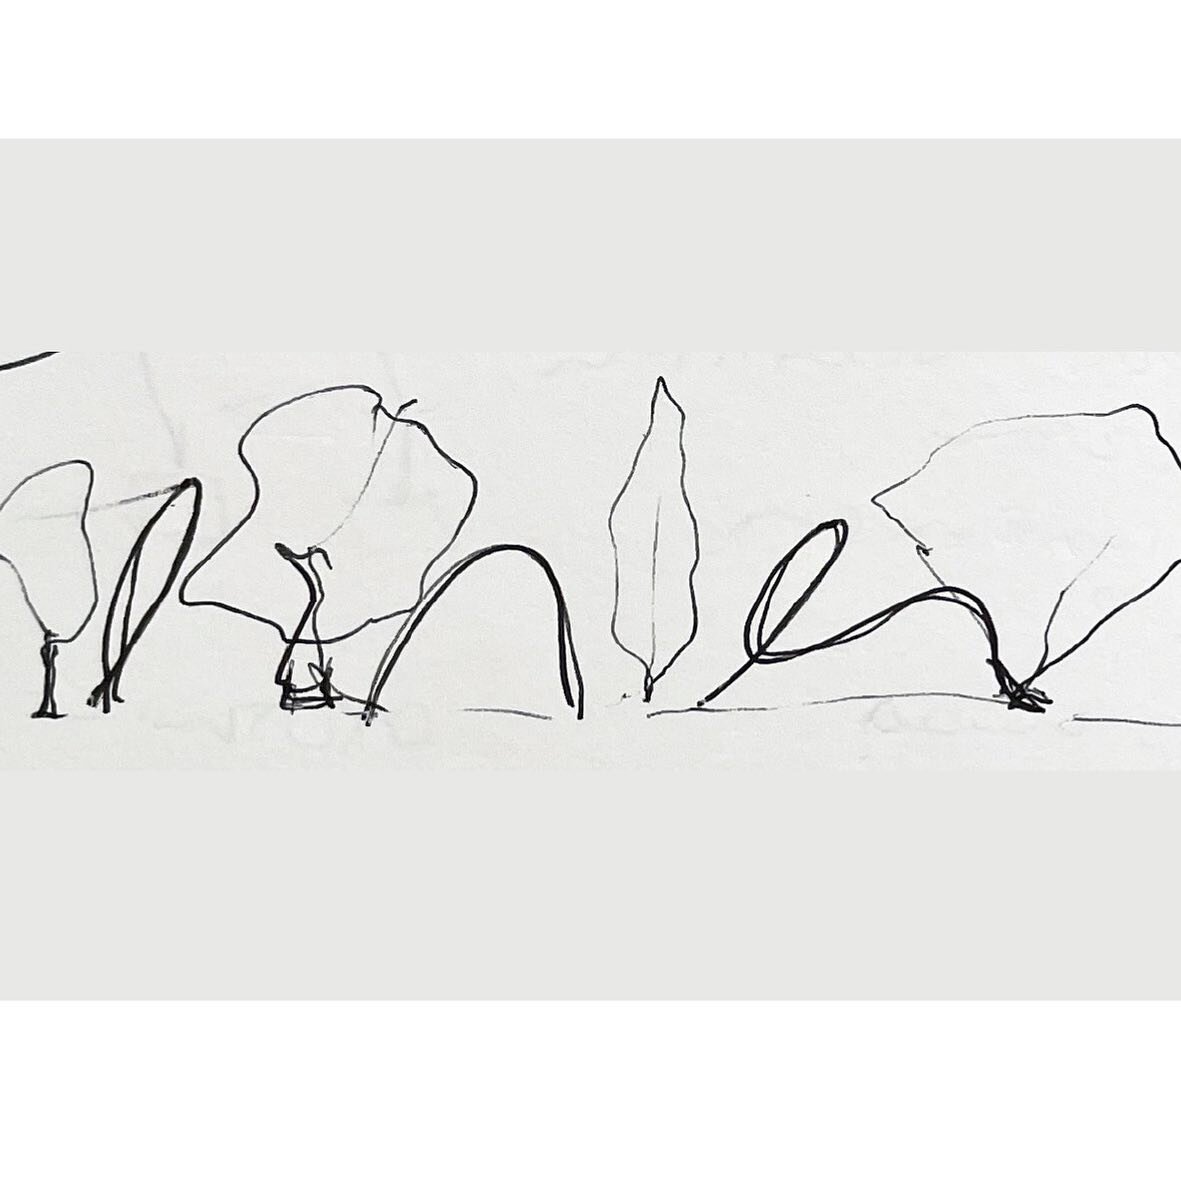 A public art project I&rsquo;ve been working on for a while has just been given planning permission, thrilled it&rsquo;s about to take off! 

This wriggly little thought sketch is going to become a composition of cherry trees and sculptural drawings 